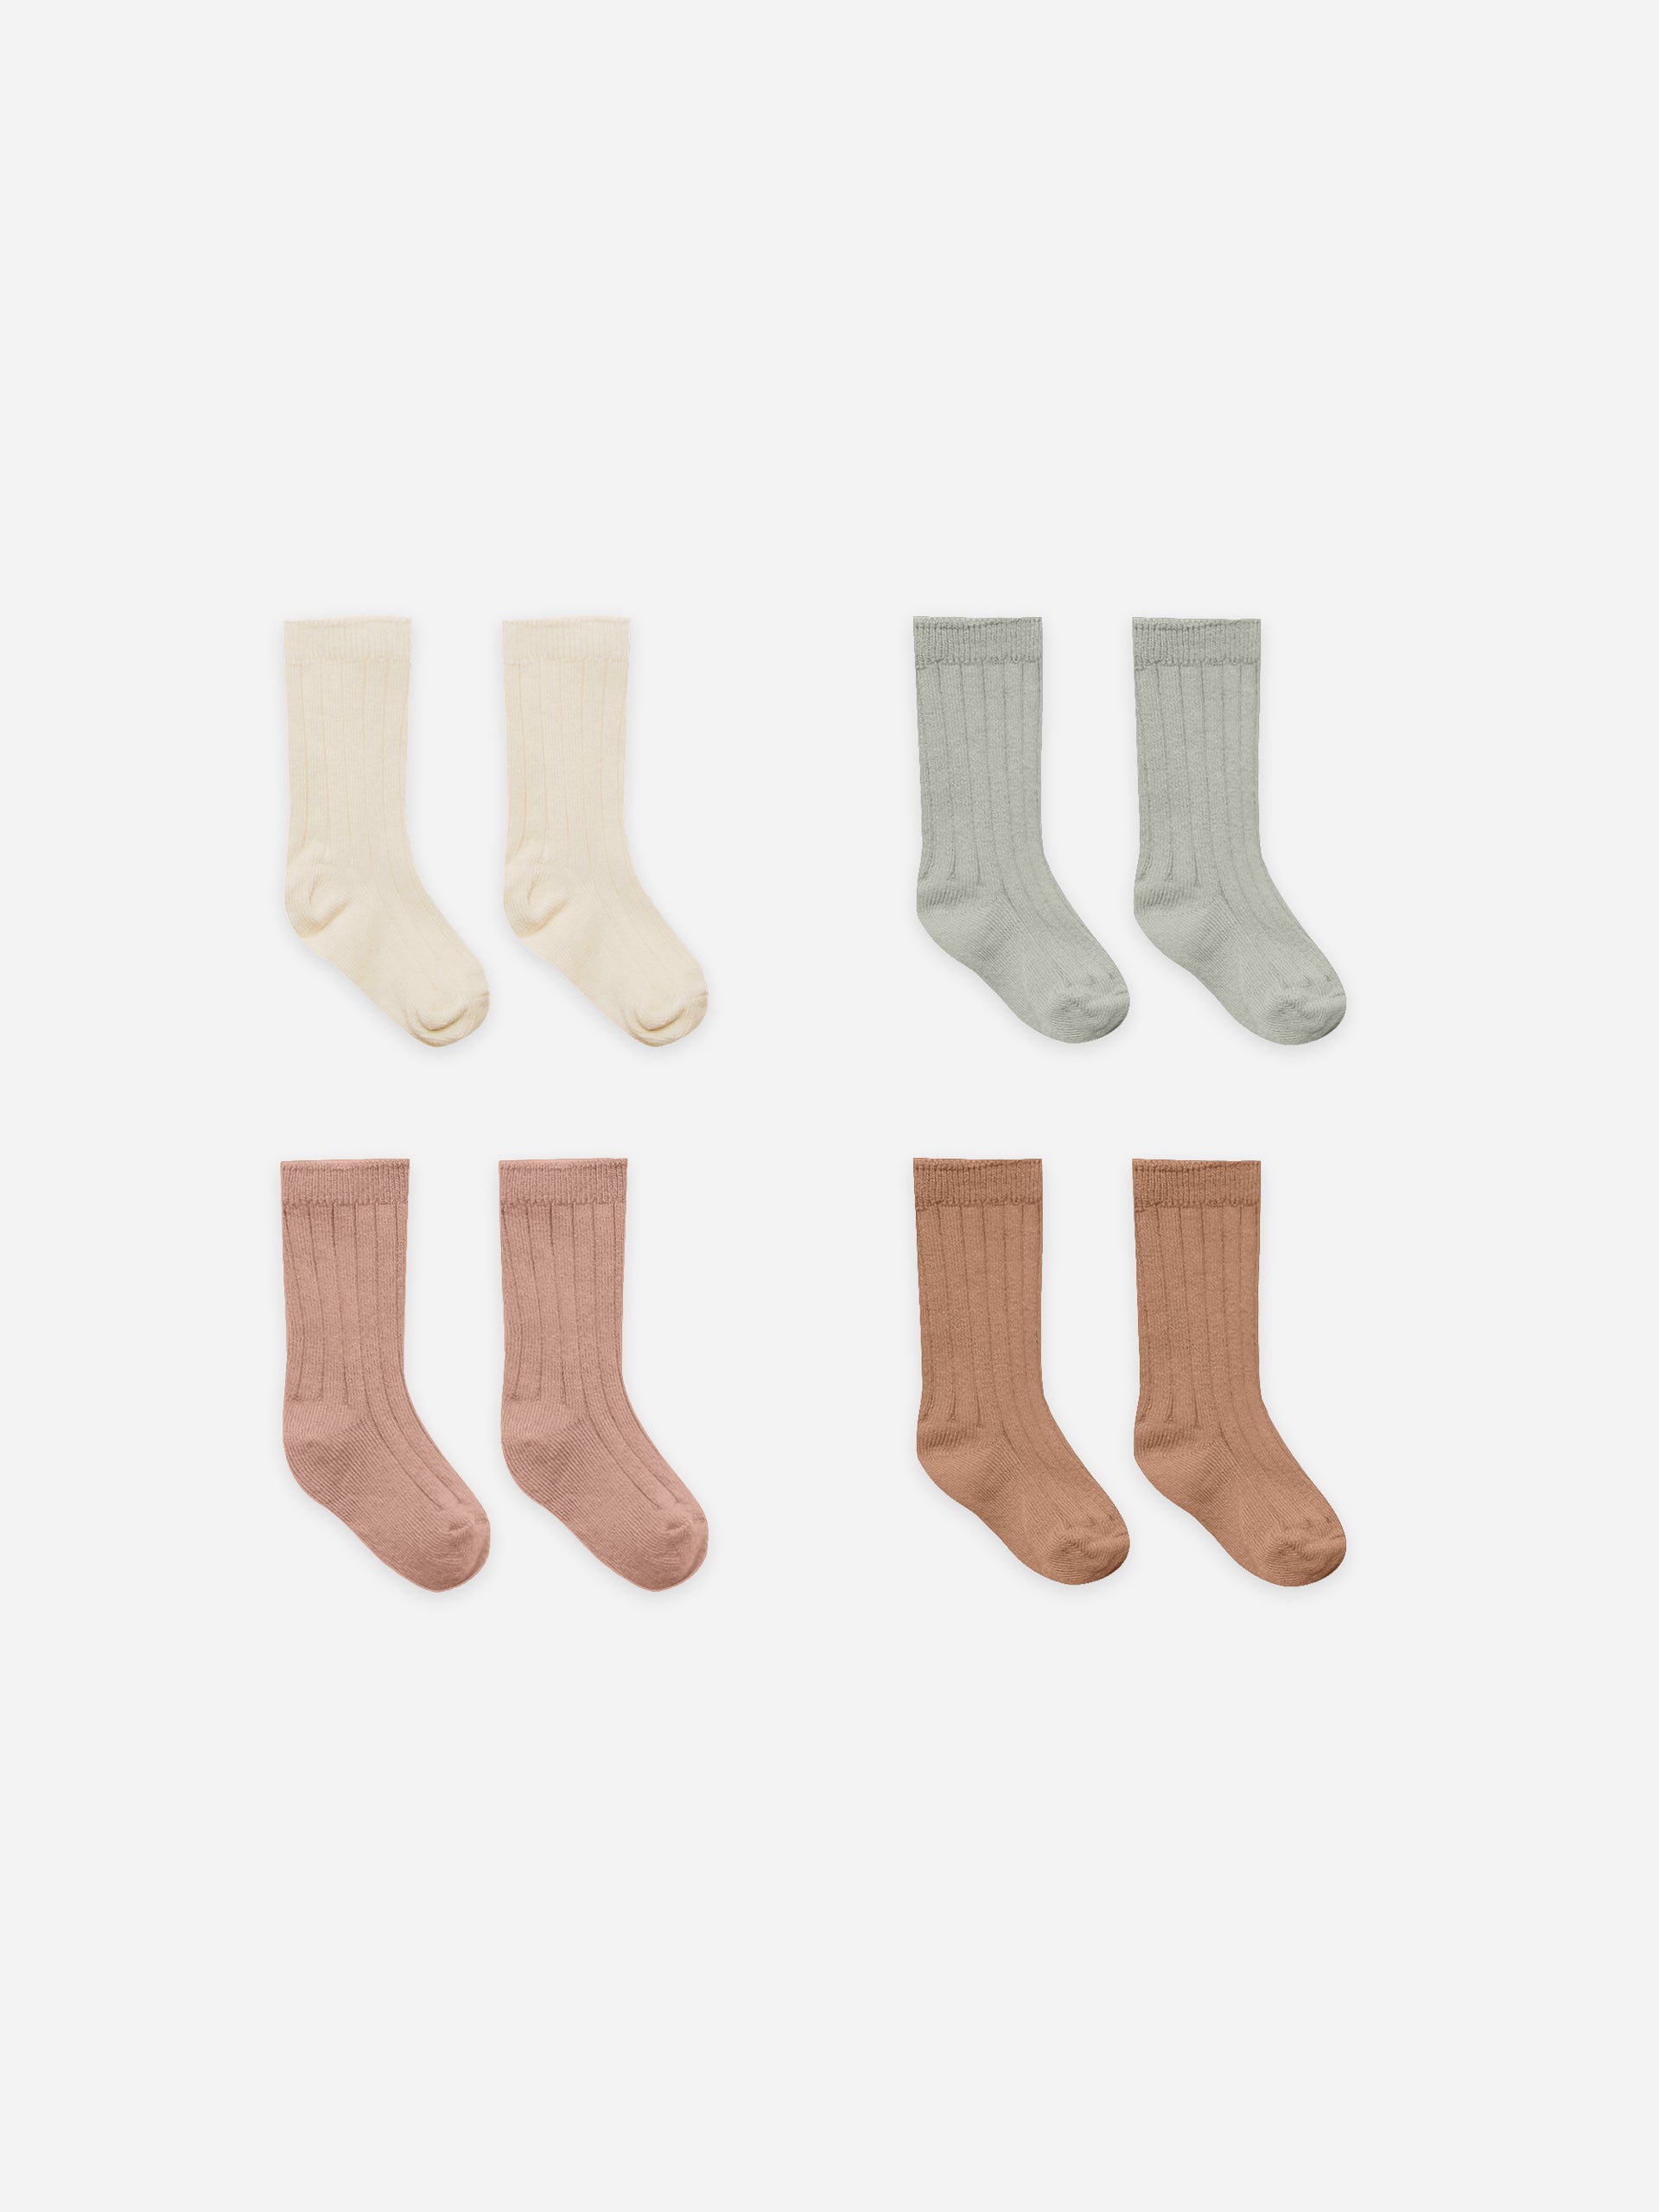 socks, set of 4 | ivory, pistachio, lilac, clay - Quincy Mae | Baby Basics | Baby Clothing | Organic Baby Clothes | Modern Baby Boy Clothes |